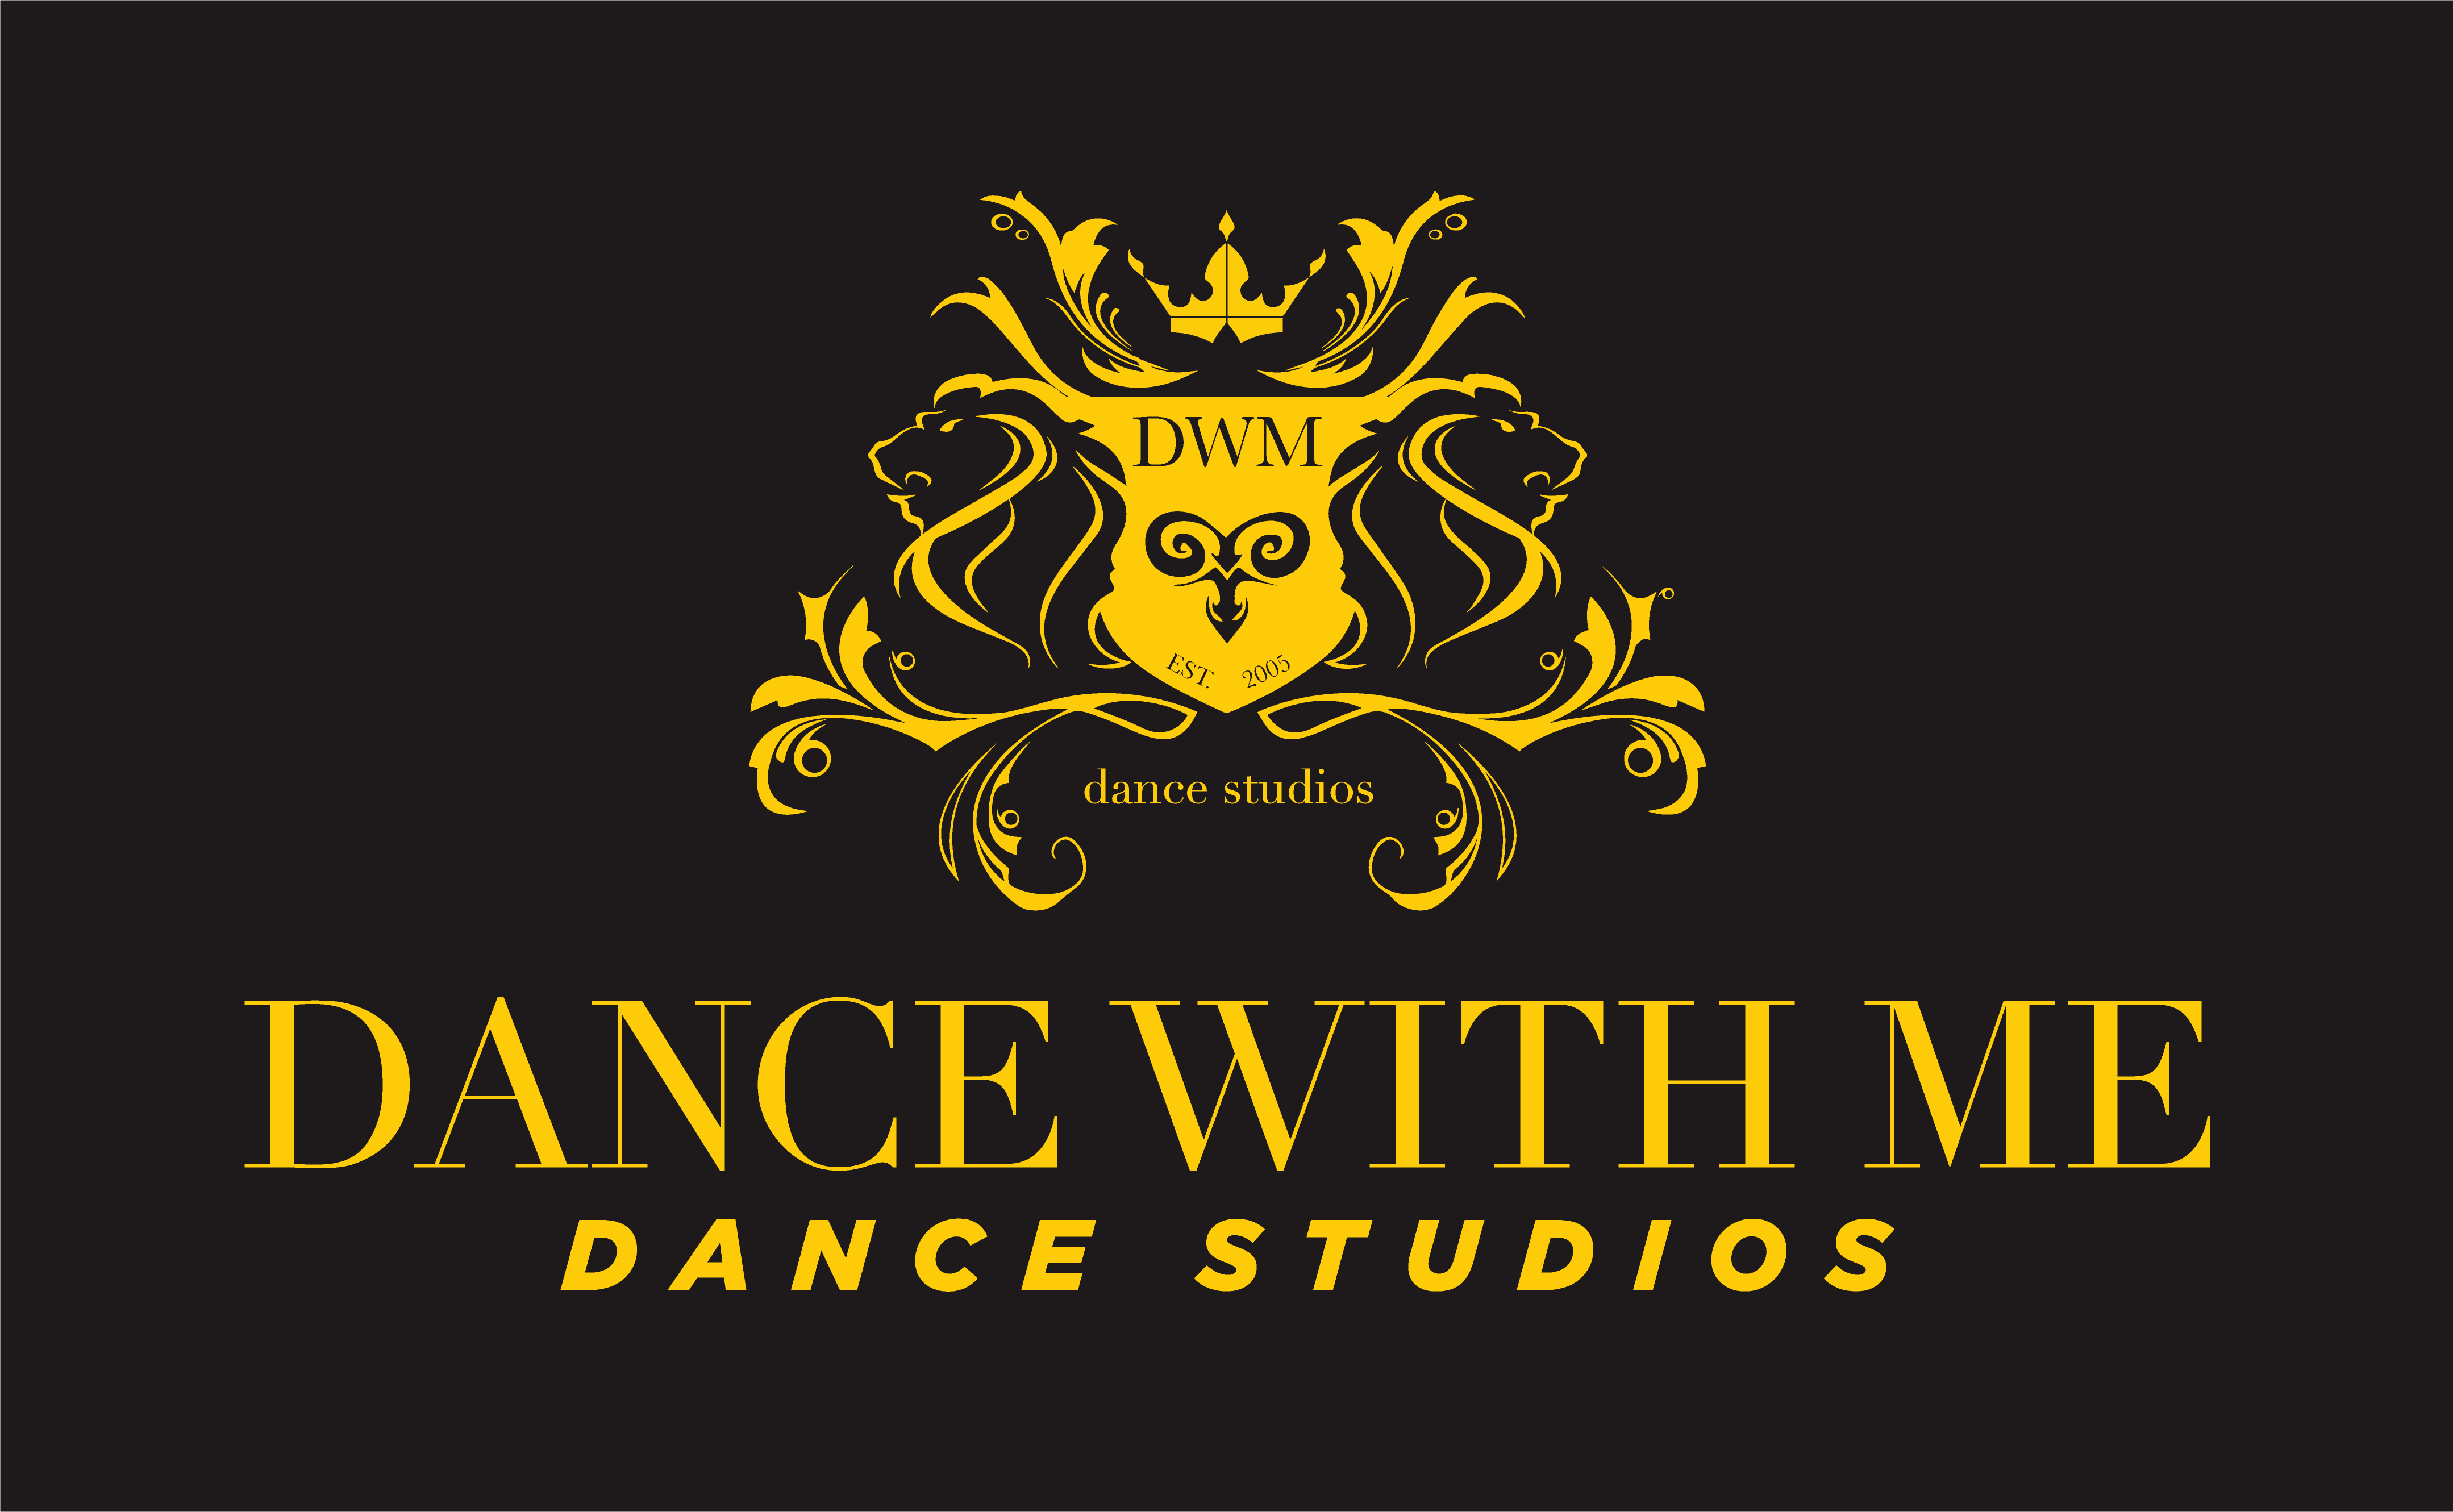 Dance With Me Long Island review